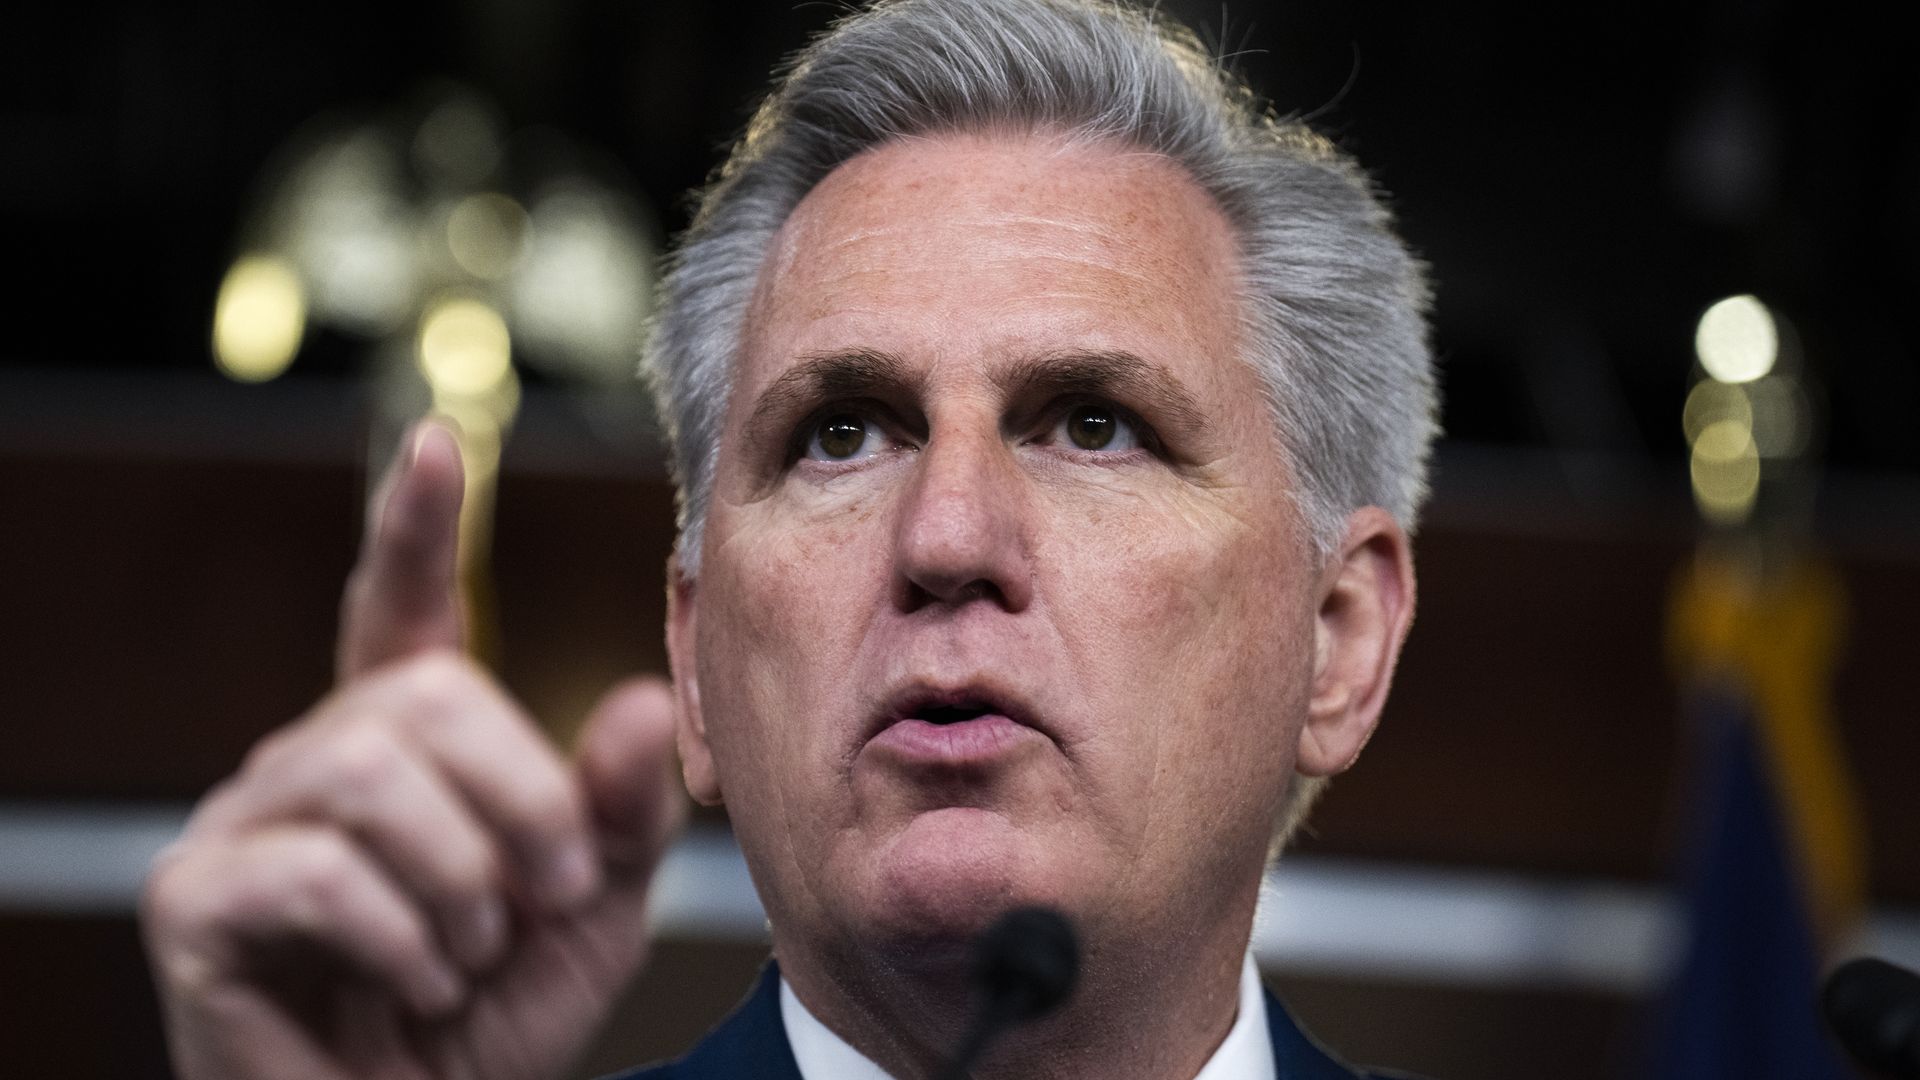 House Minority Leader Kevin McCarthy is seen gesturing during a news conference.